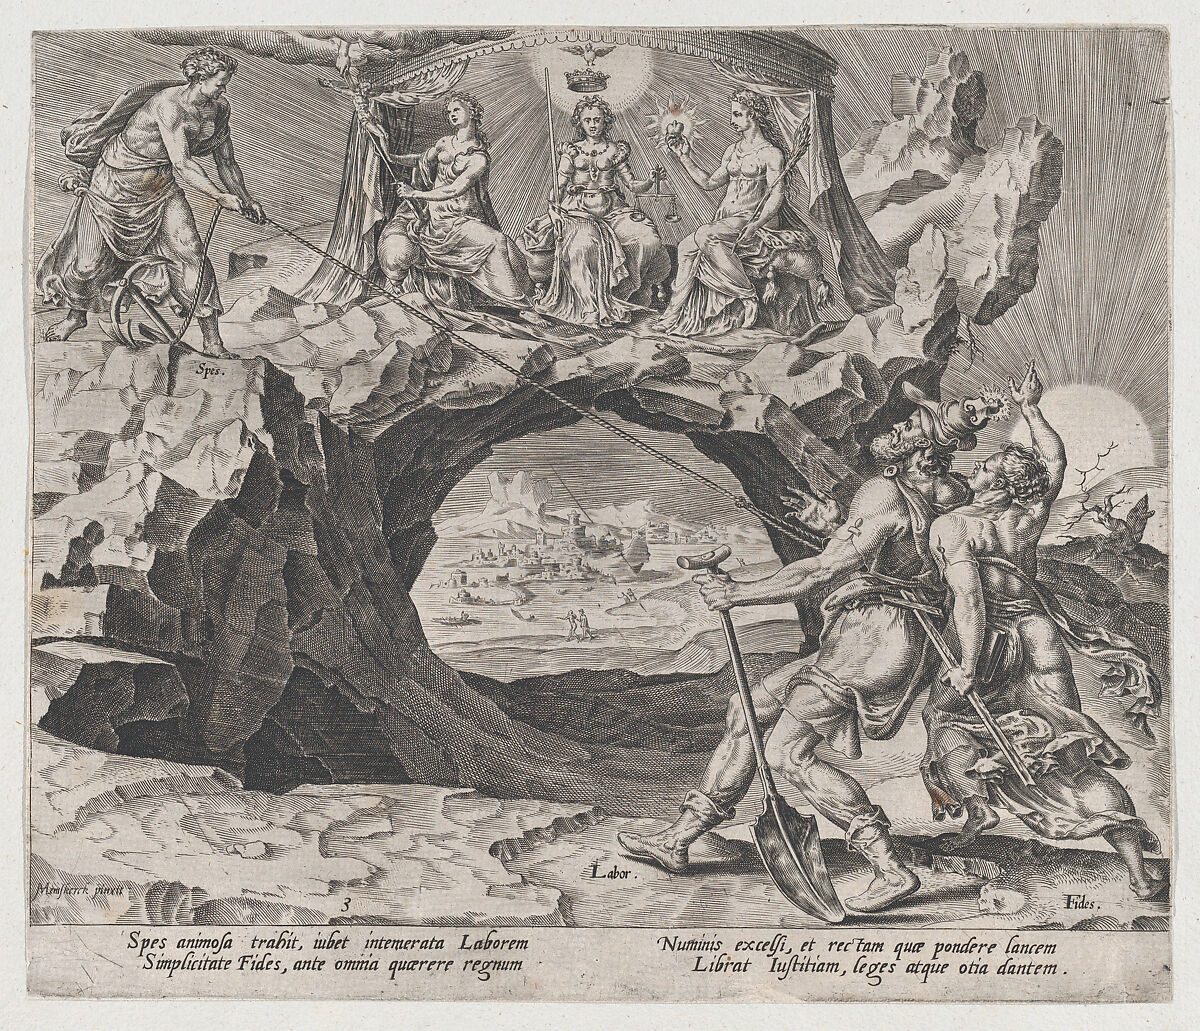 The Diligent Worker Aspiring to the Righteousness of the Lord, from The Reward of Labour and Diligence, plate 3, Philips Galle (Netherlandish, Haarlem 1537–1612 Antwerp), Engraving, second state of three (New Hollstein) 